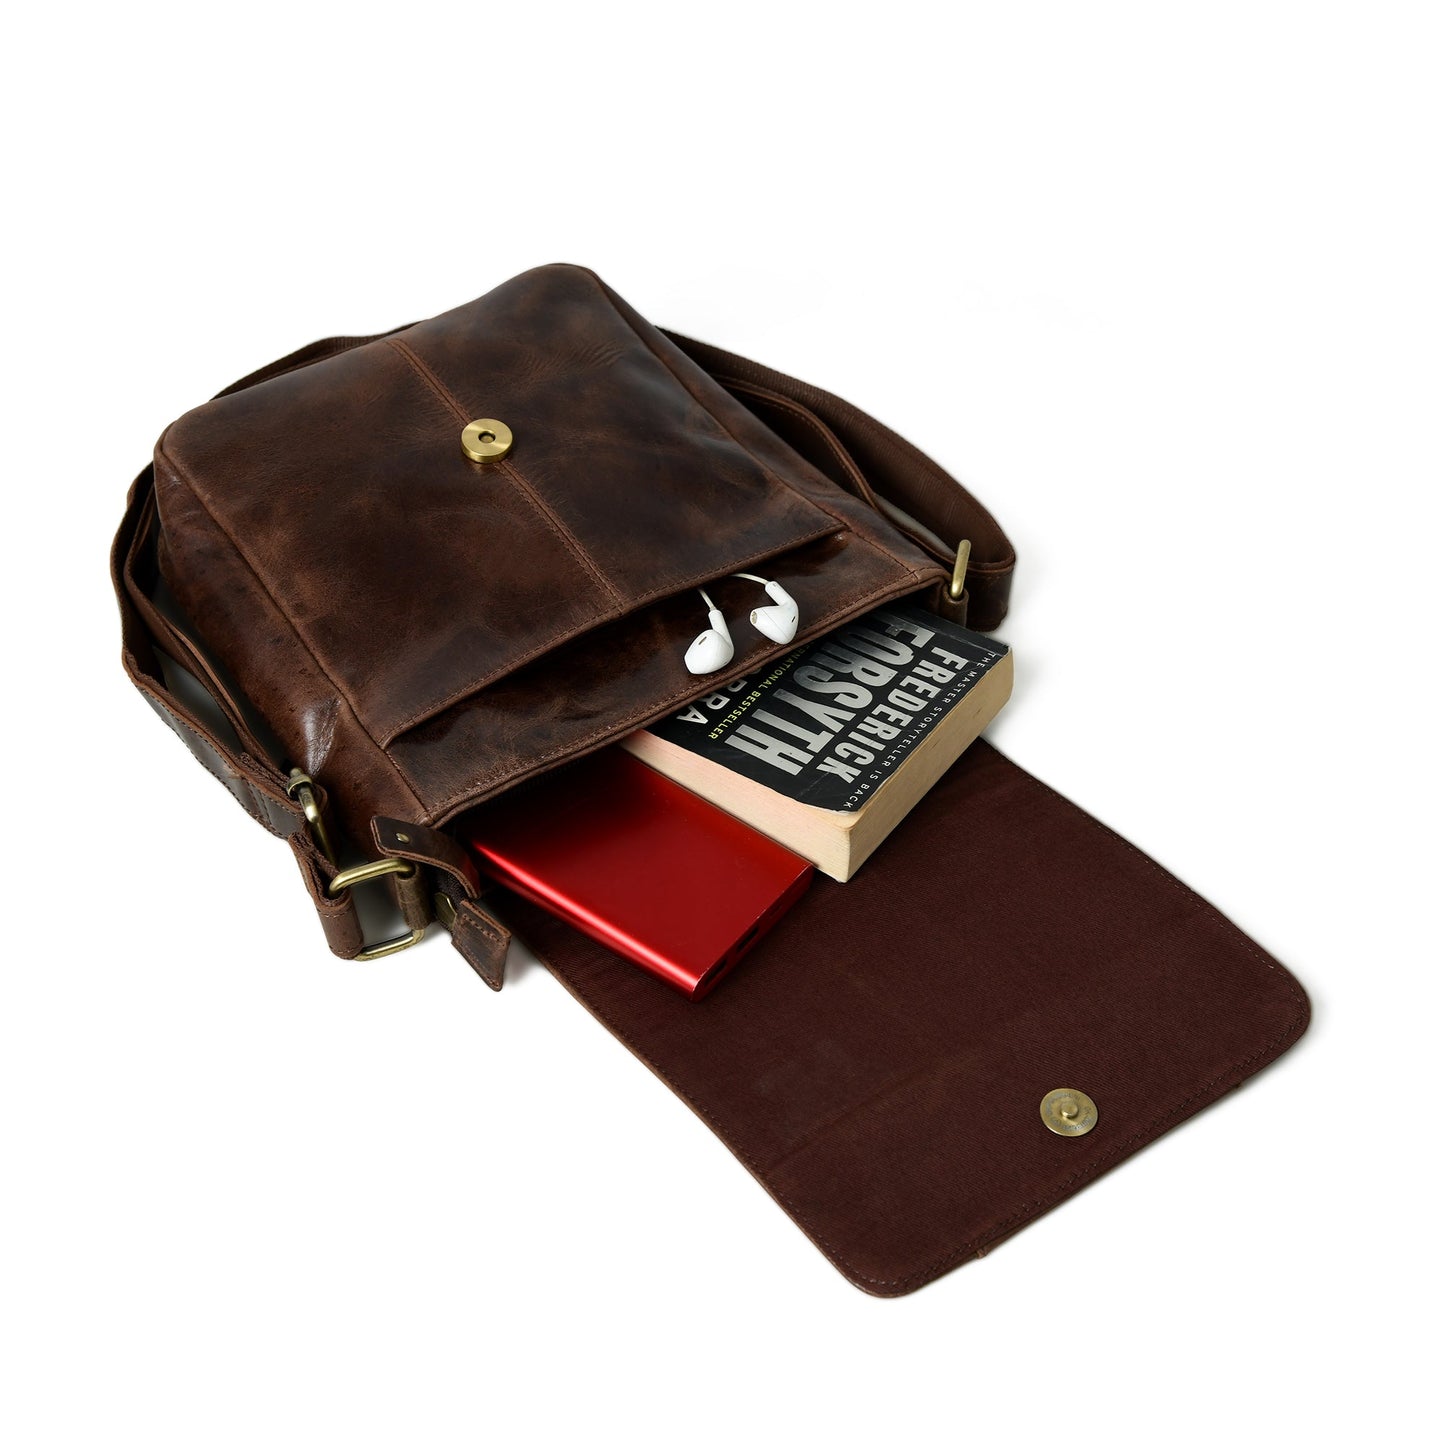 Brown Leather Crossbody Bag - The Tool Store